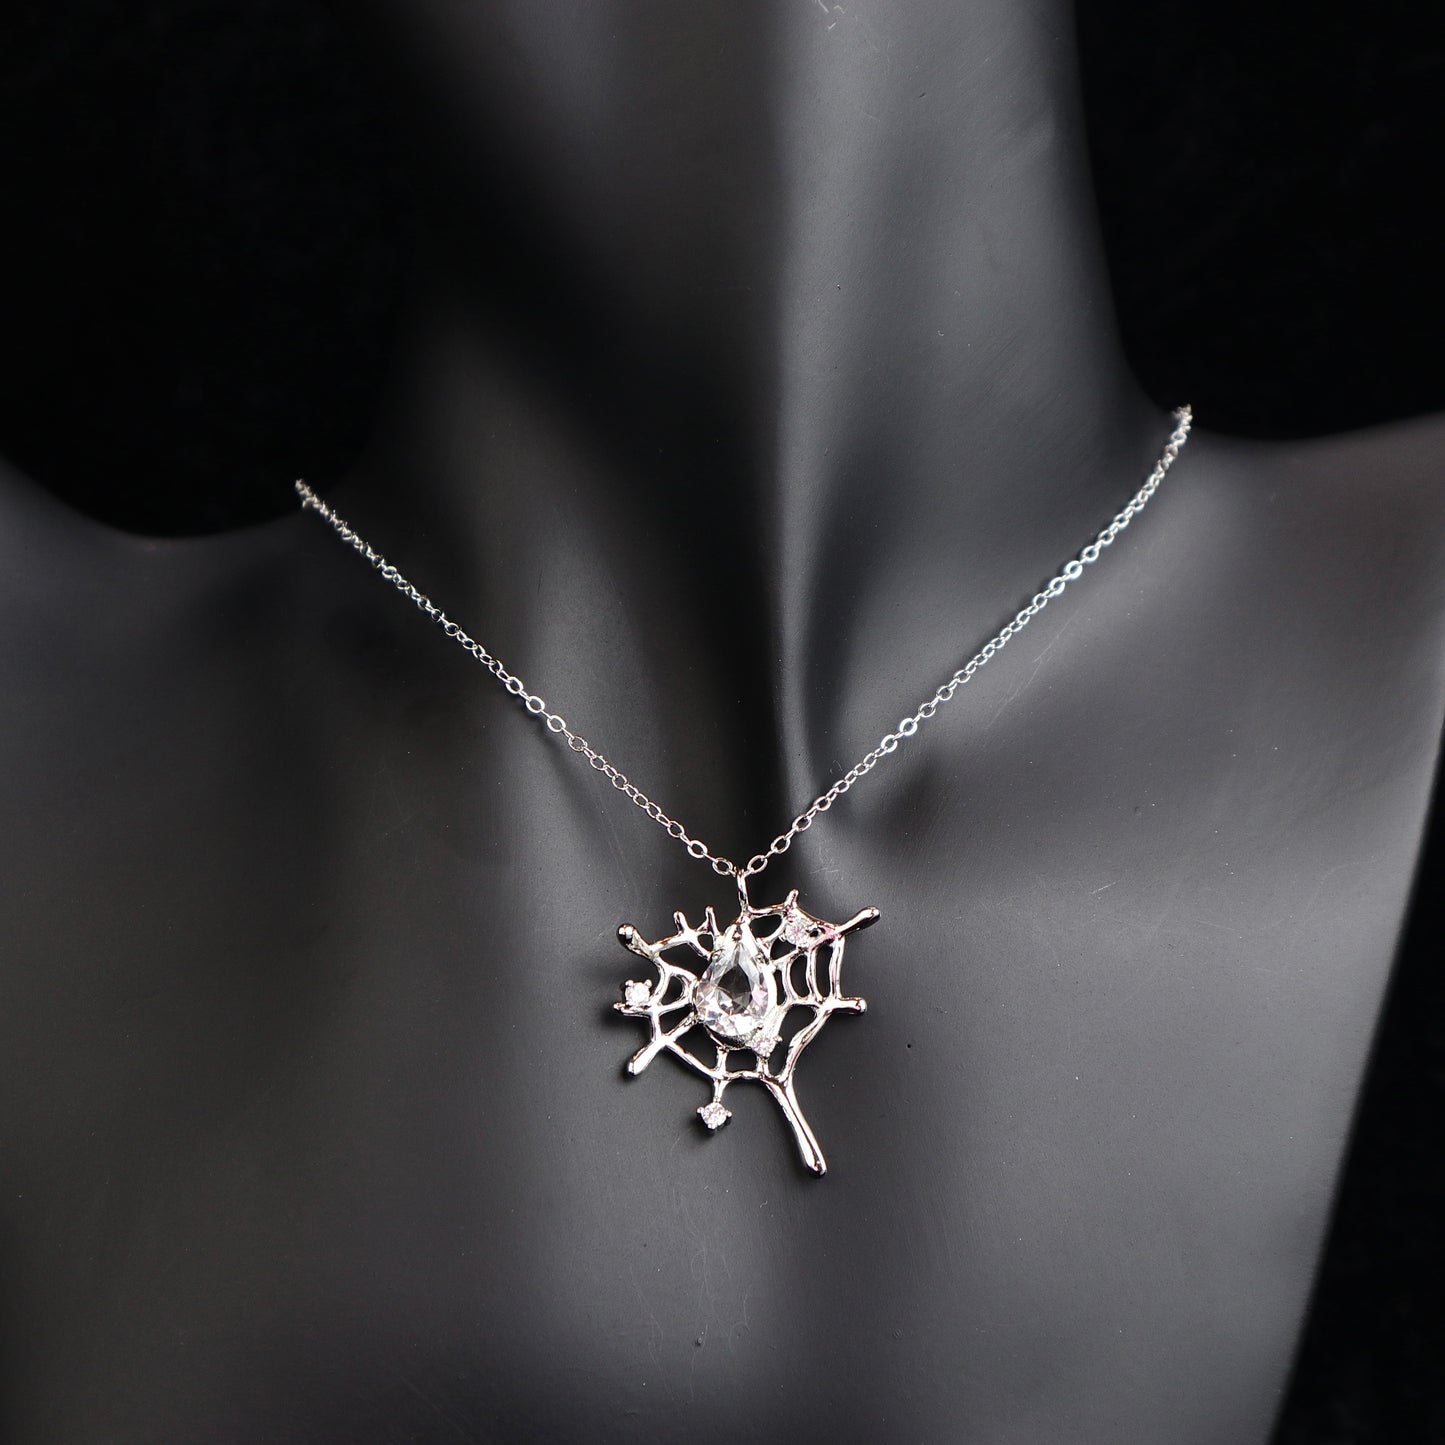 Spider Web necklace for halloween